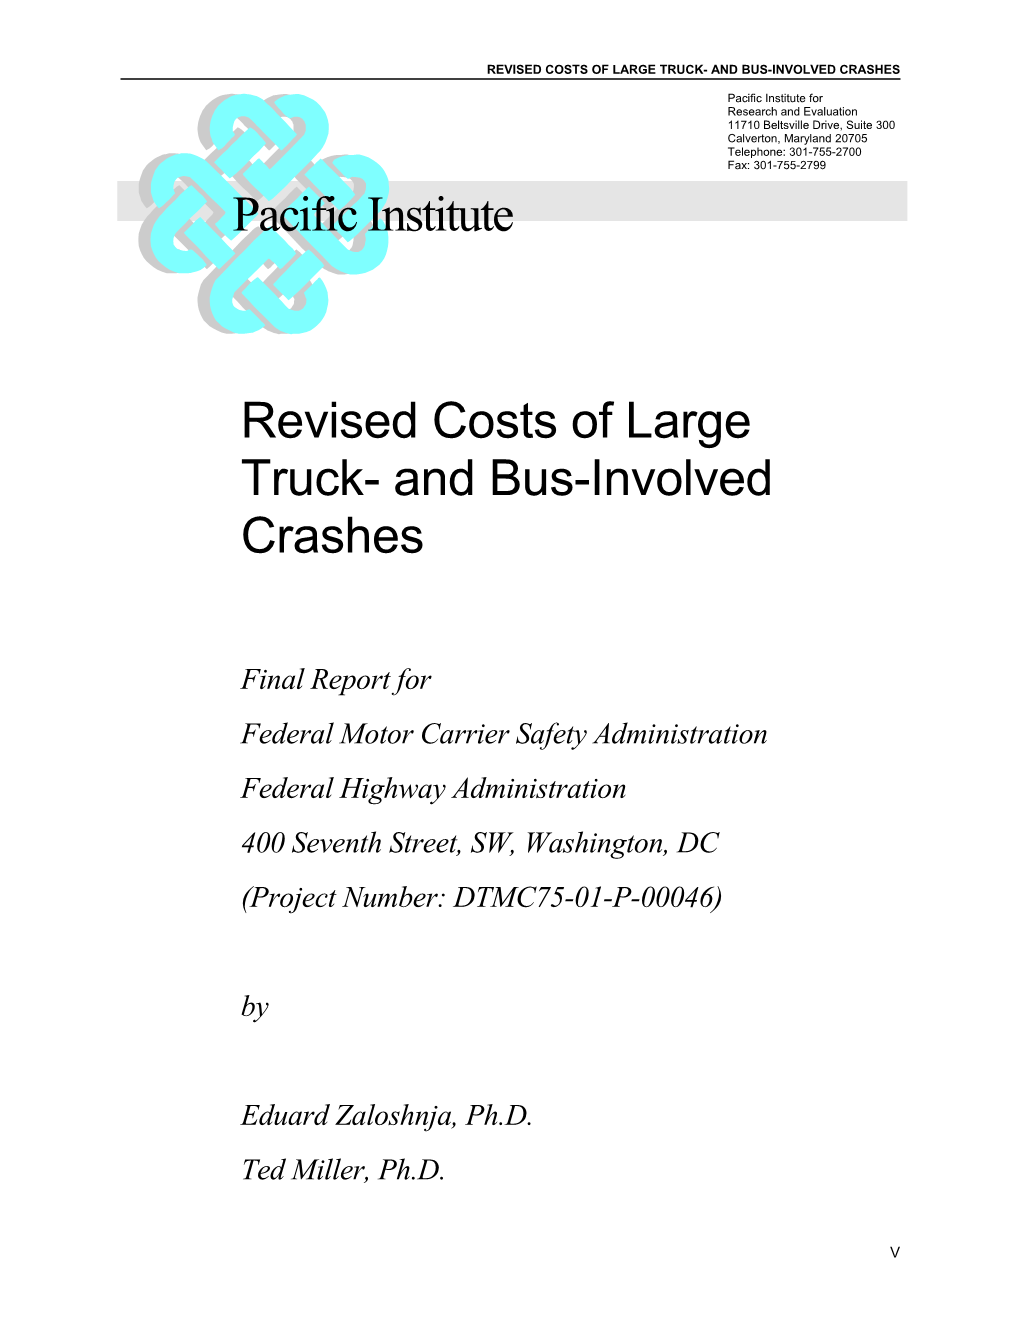 This Study Is the First Major Update of Truck/Bus Crash Costs in a Decade